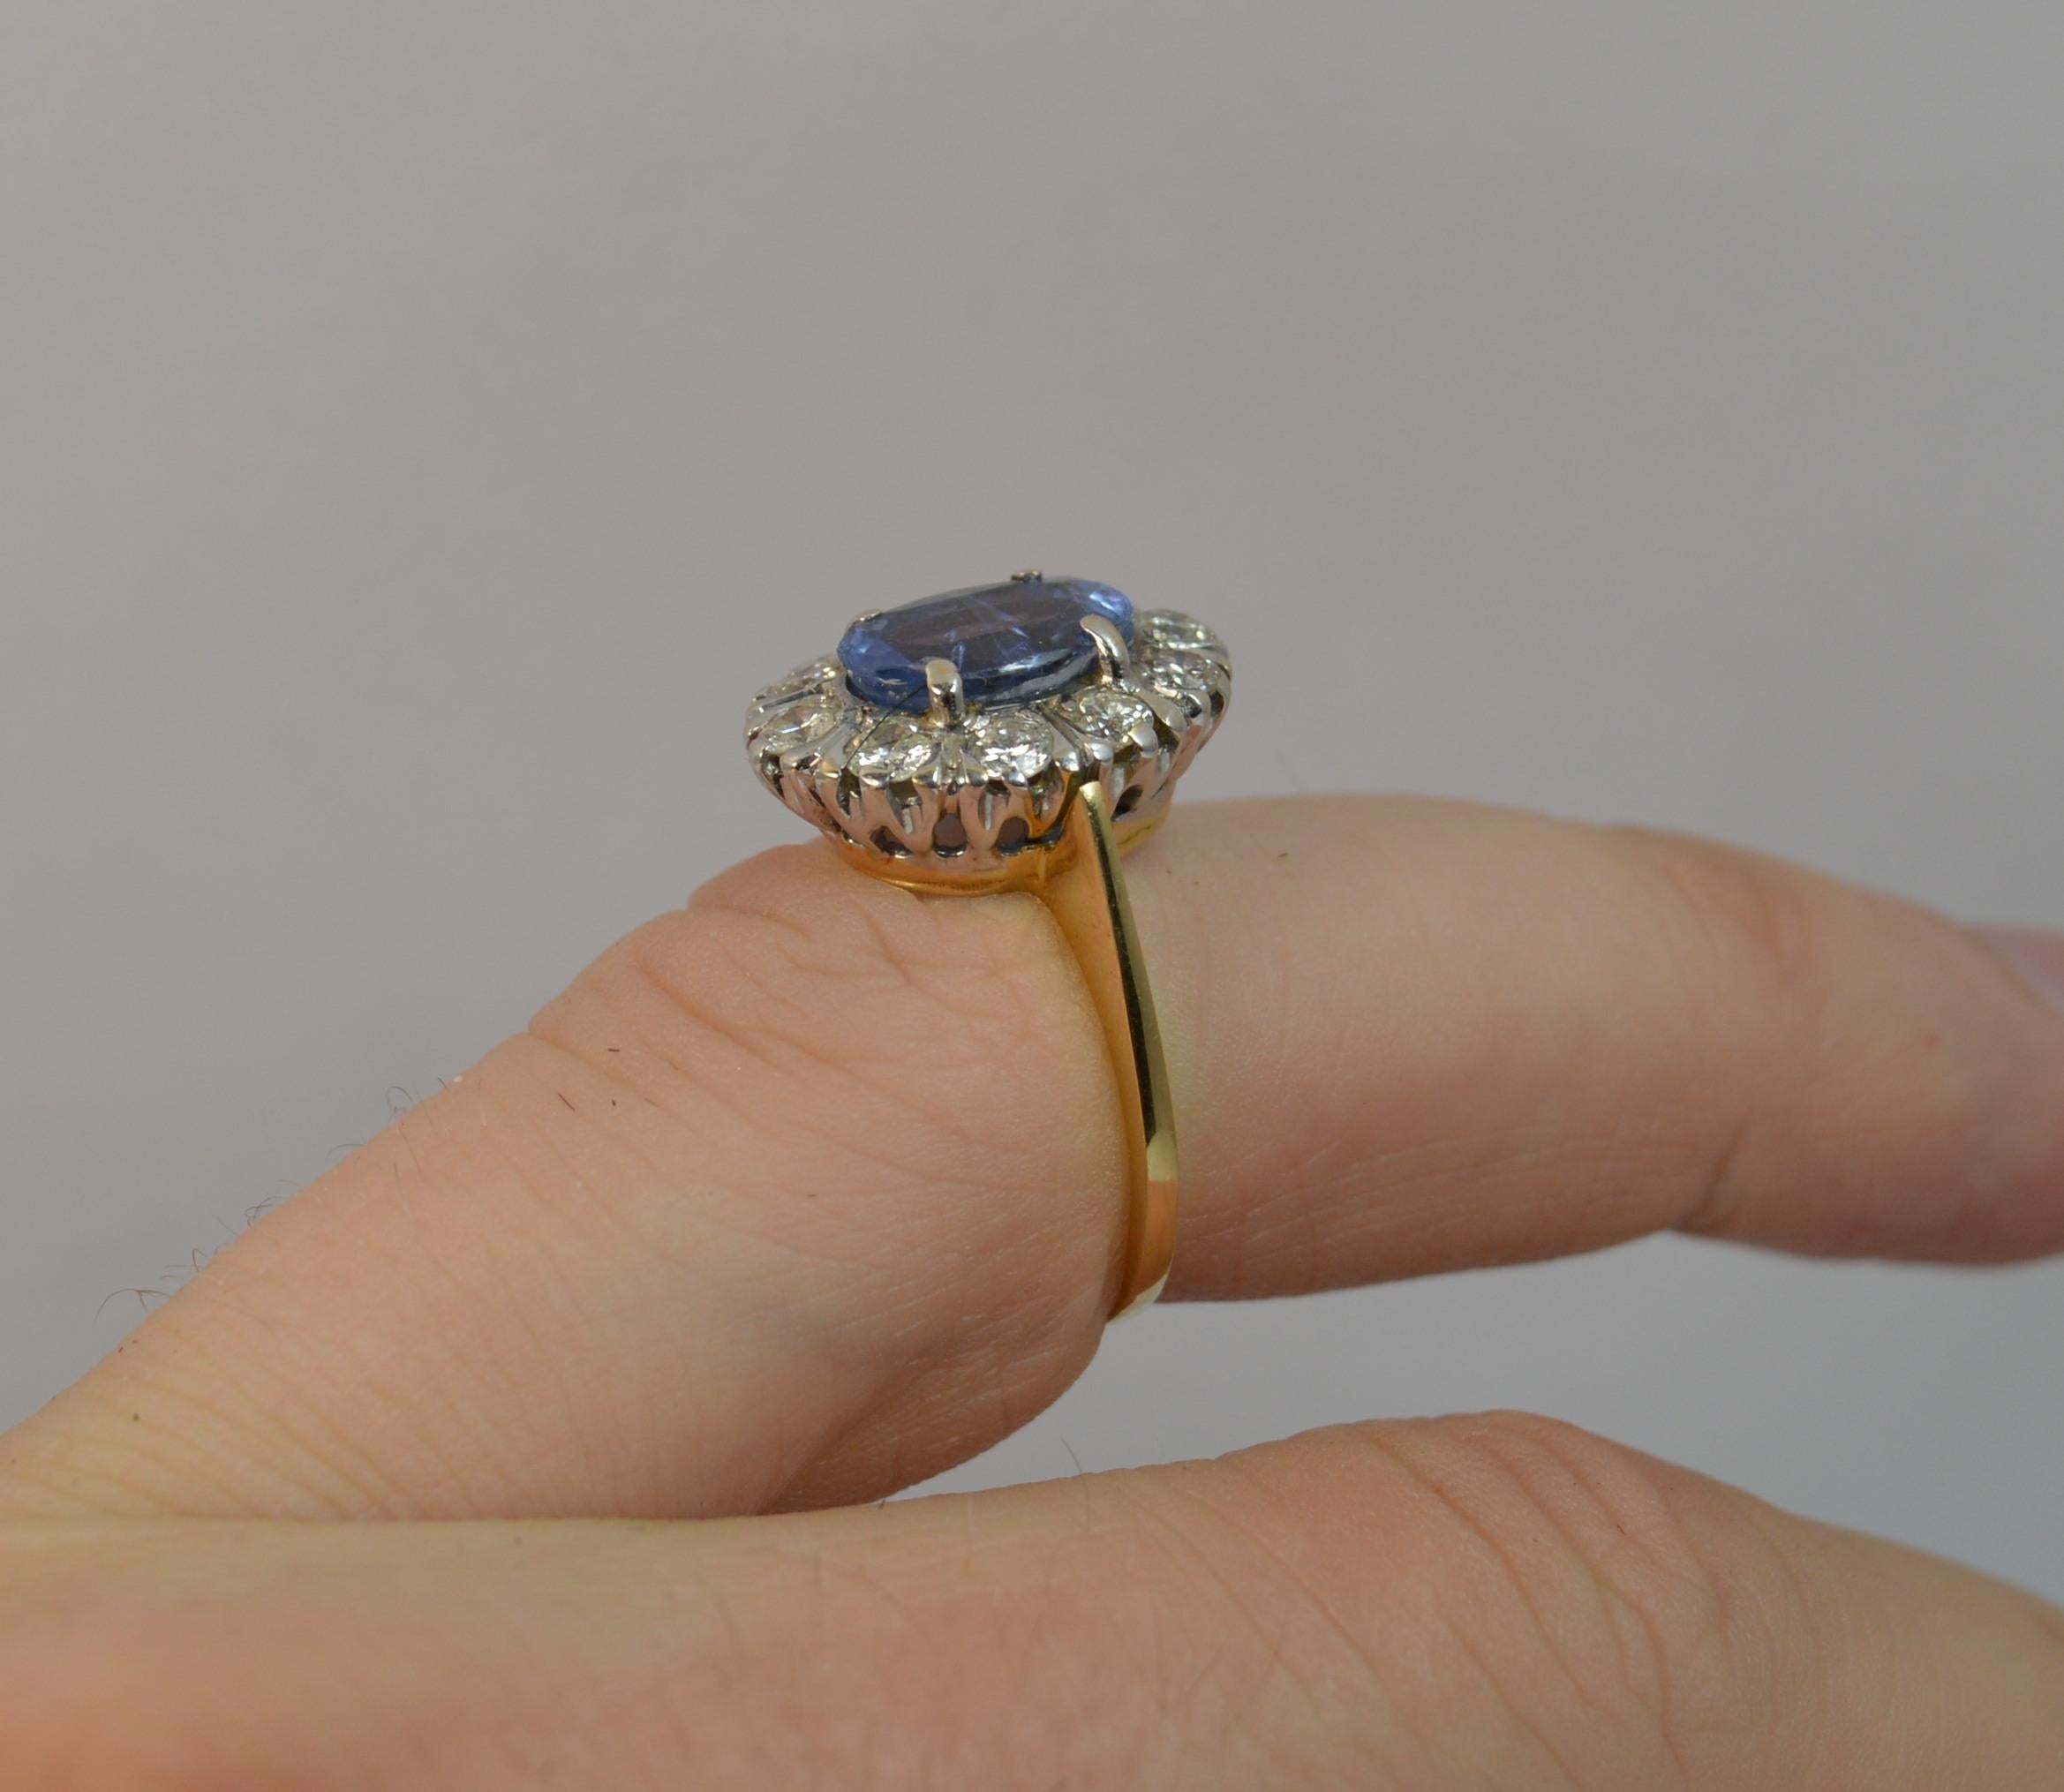 A beautiful Sapphire and Diamond ring. Comes complete with hard a4 page confirming the sapphire is of Ceylon origin with no heat treatment.
SIZE ; J 1/2 UK, 5 US
The large oval cut sapphire to the centre in four claw setting, 6.4mm x 9.2mm x